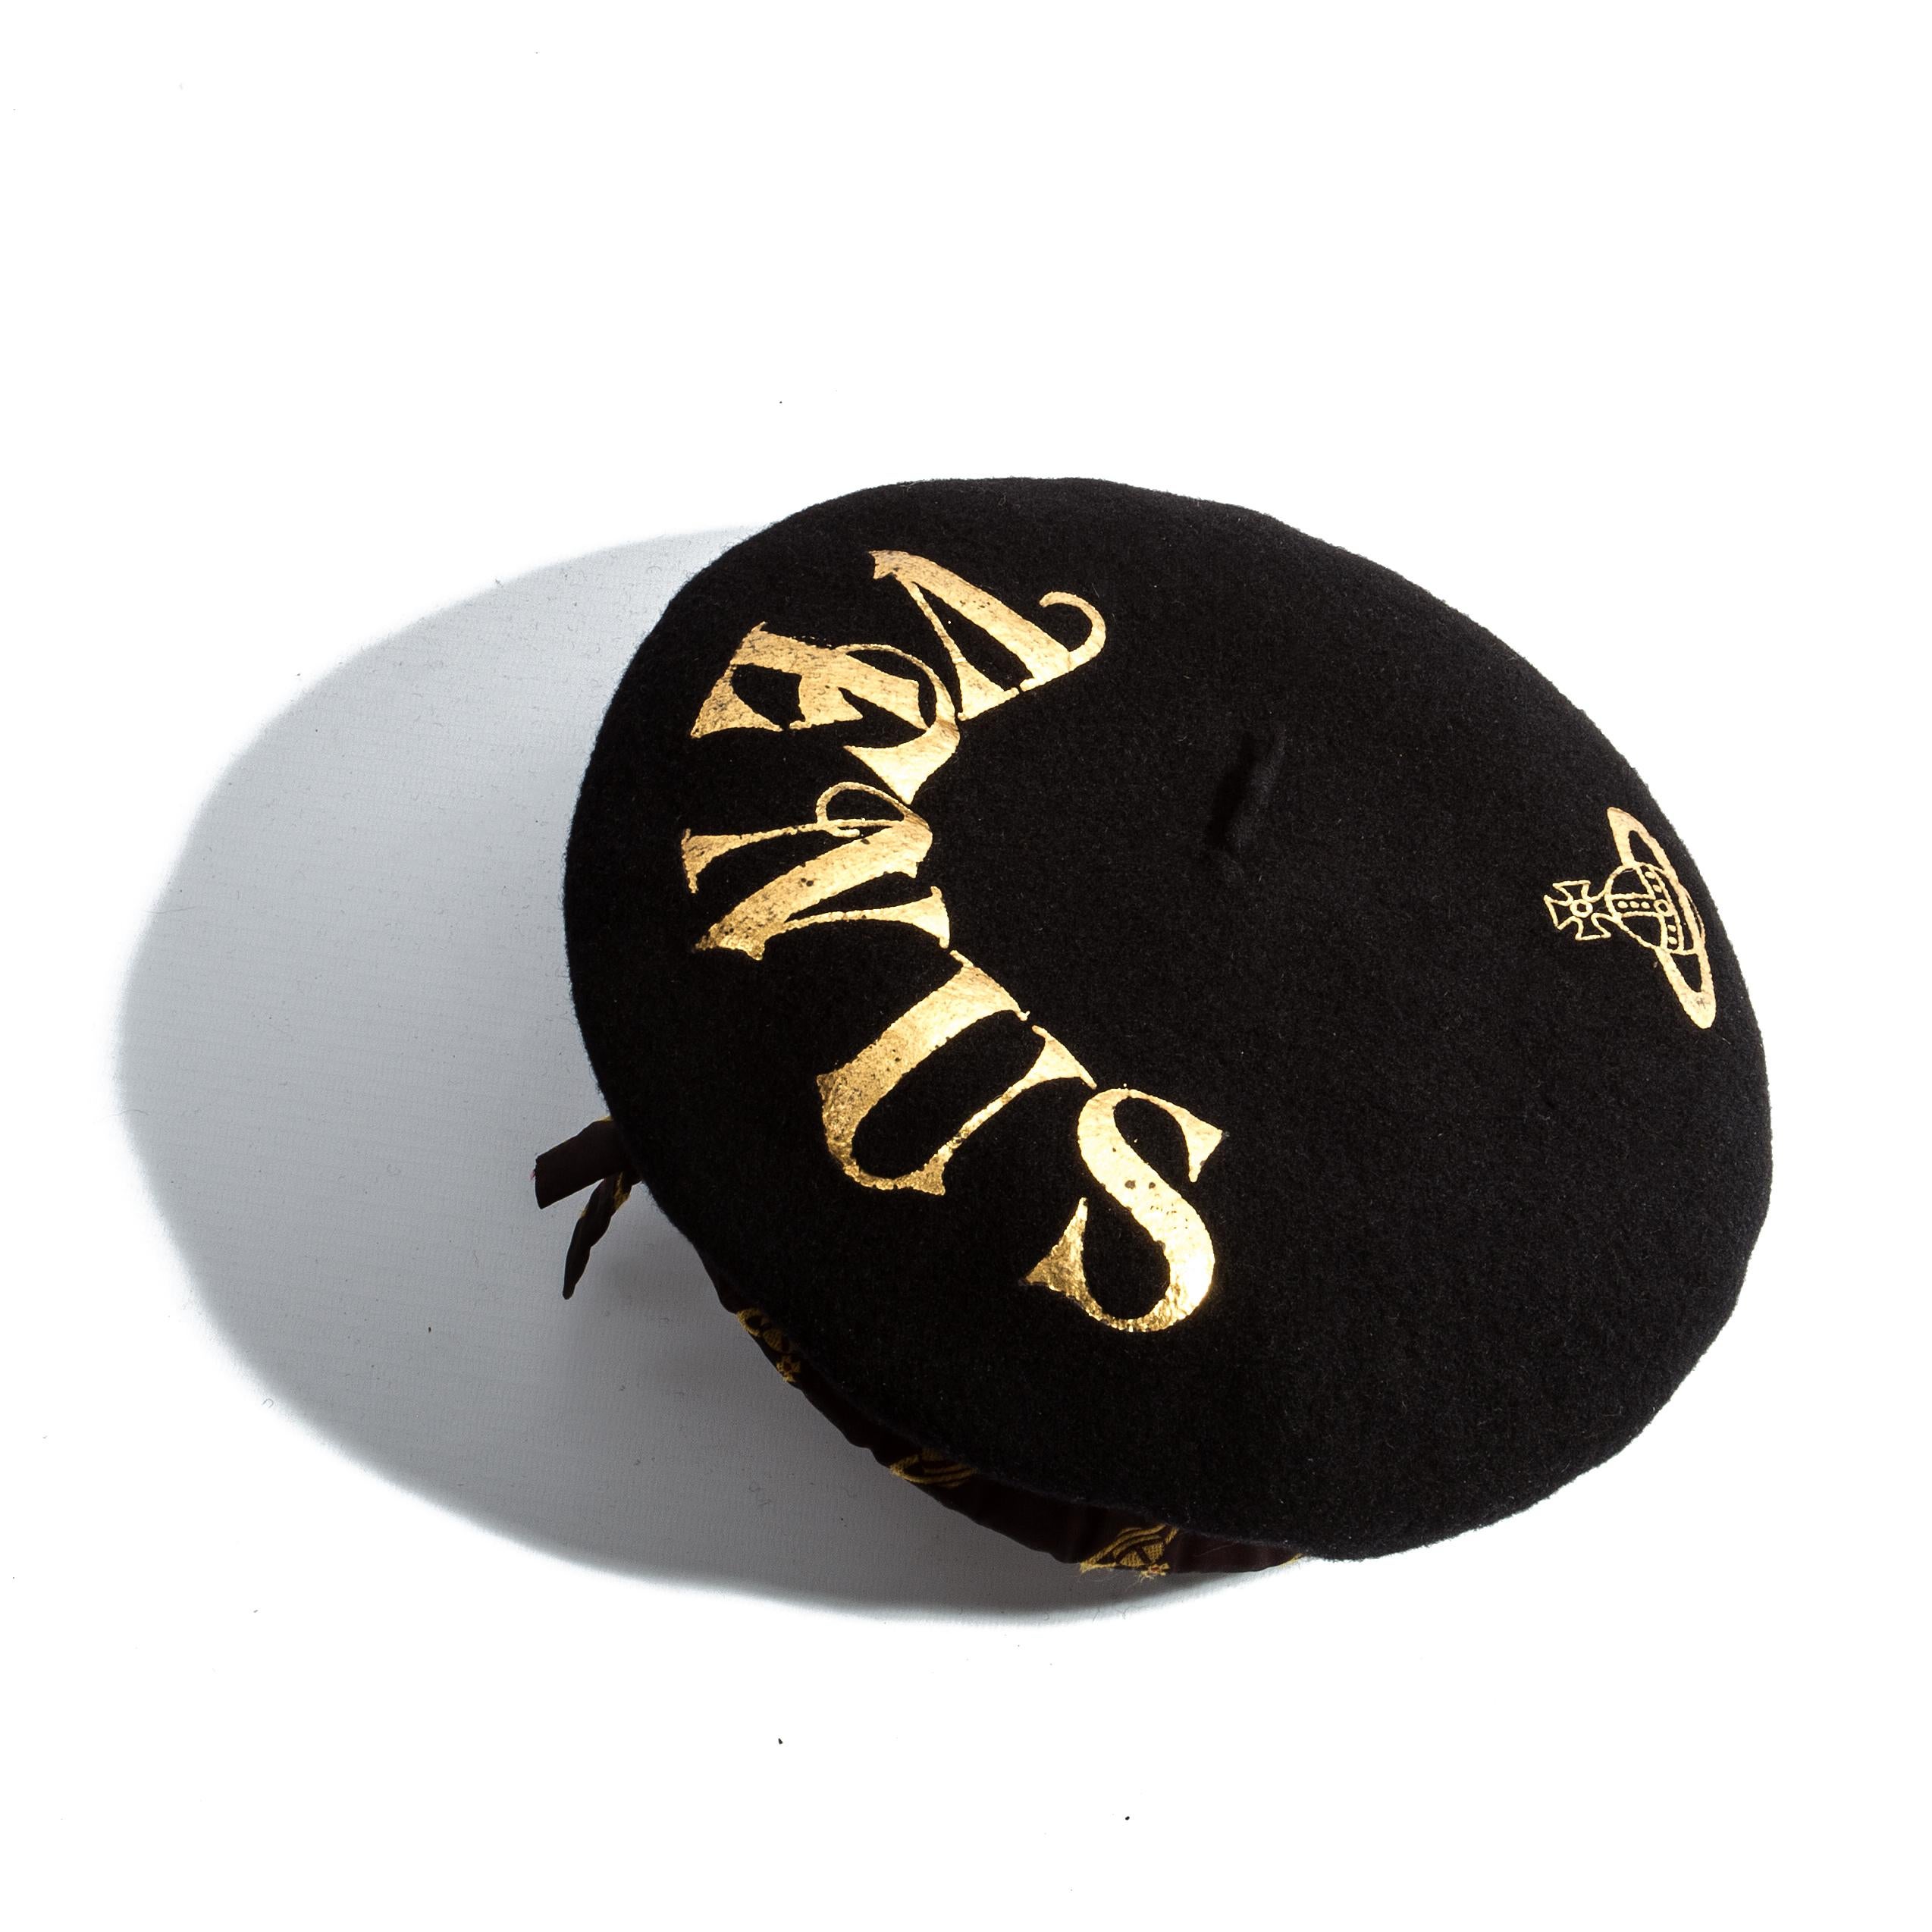 Rare Vivienne Westwood black wool beret with gold leaf 'Venus' and signature Orb logo. Made for the 'Choice' tour with Sara Stockbridge in 1988.

Pagan I, Spring-Summer 1988